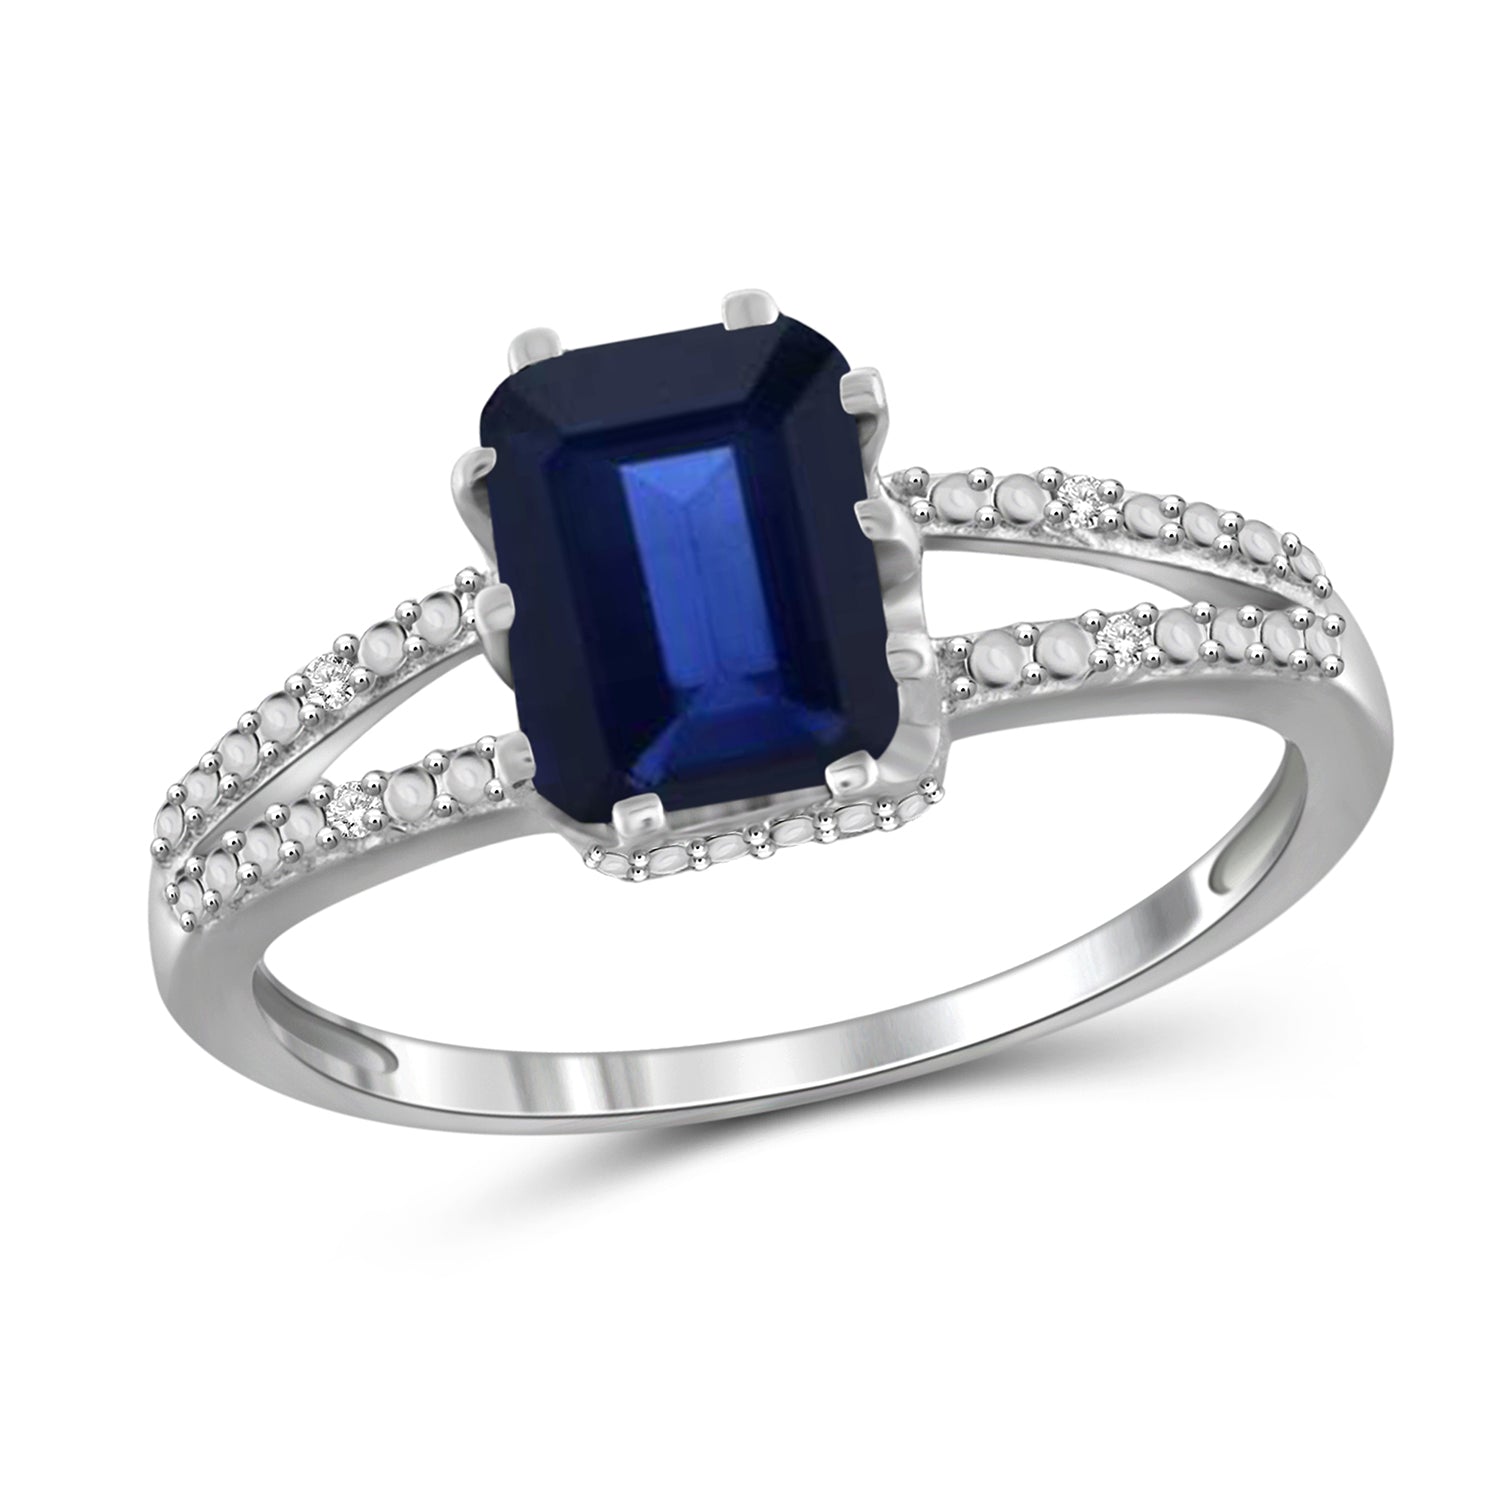 2 Carat T.G.W. Sapphire and White Diamond Accent Sterling Silver Spilt Shank Ring